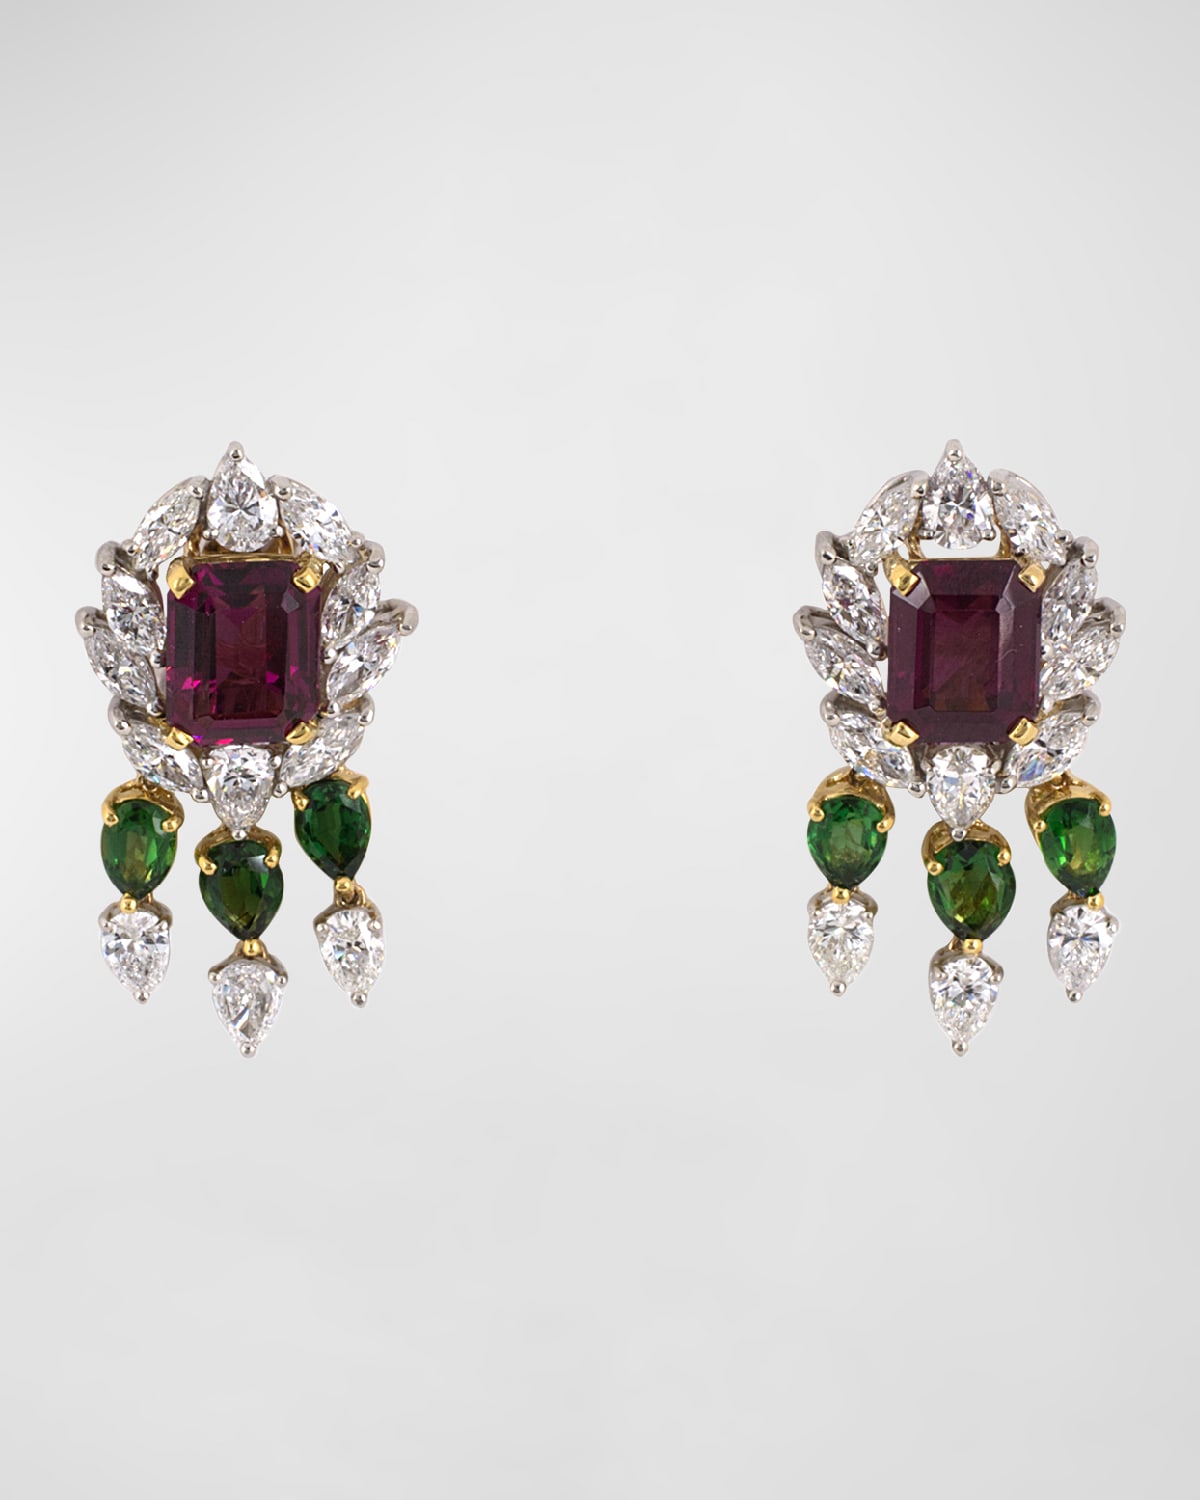 Estate 18K Yellow Gold and Platinum Drop Earrings with Garnets, Diamonds and Tourmalines